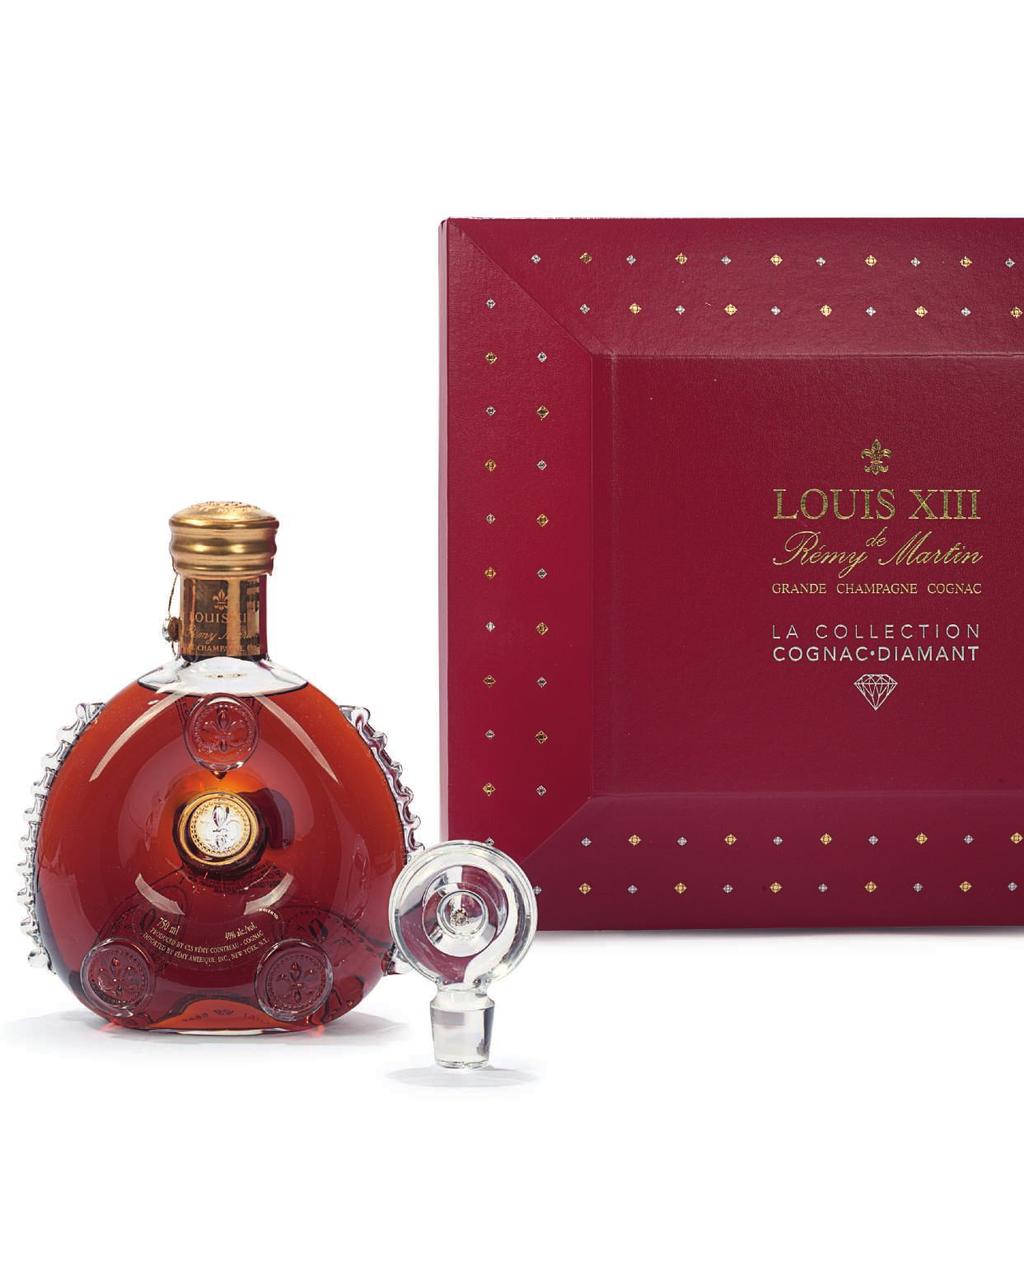 DIAMANT 66 Rémy Martin, Louis XIII, La Collection Diamant In Baccarat crystal decanter and stopper containing a 1.